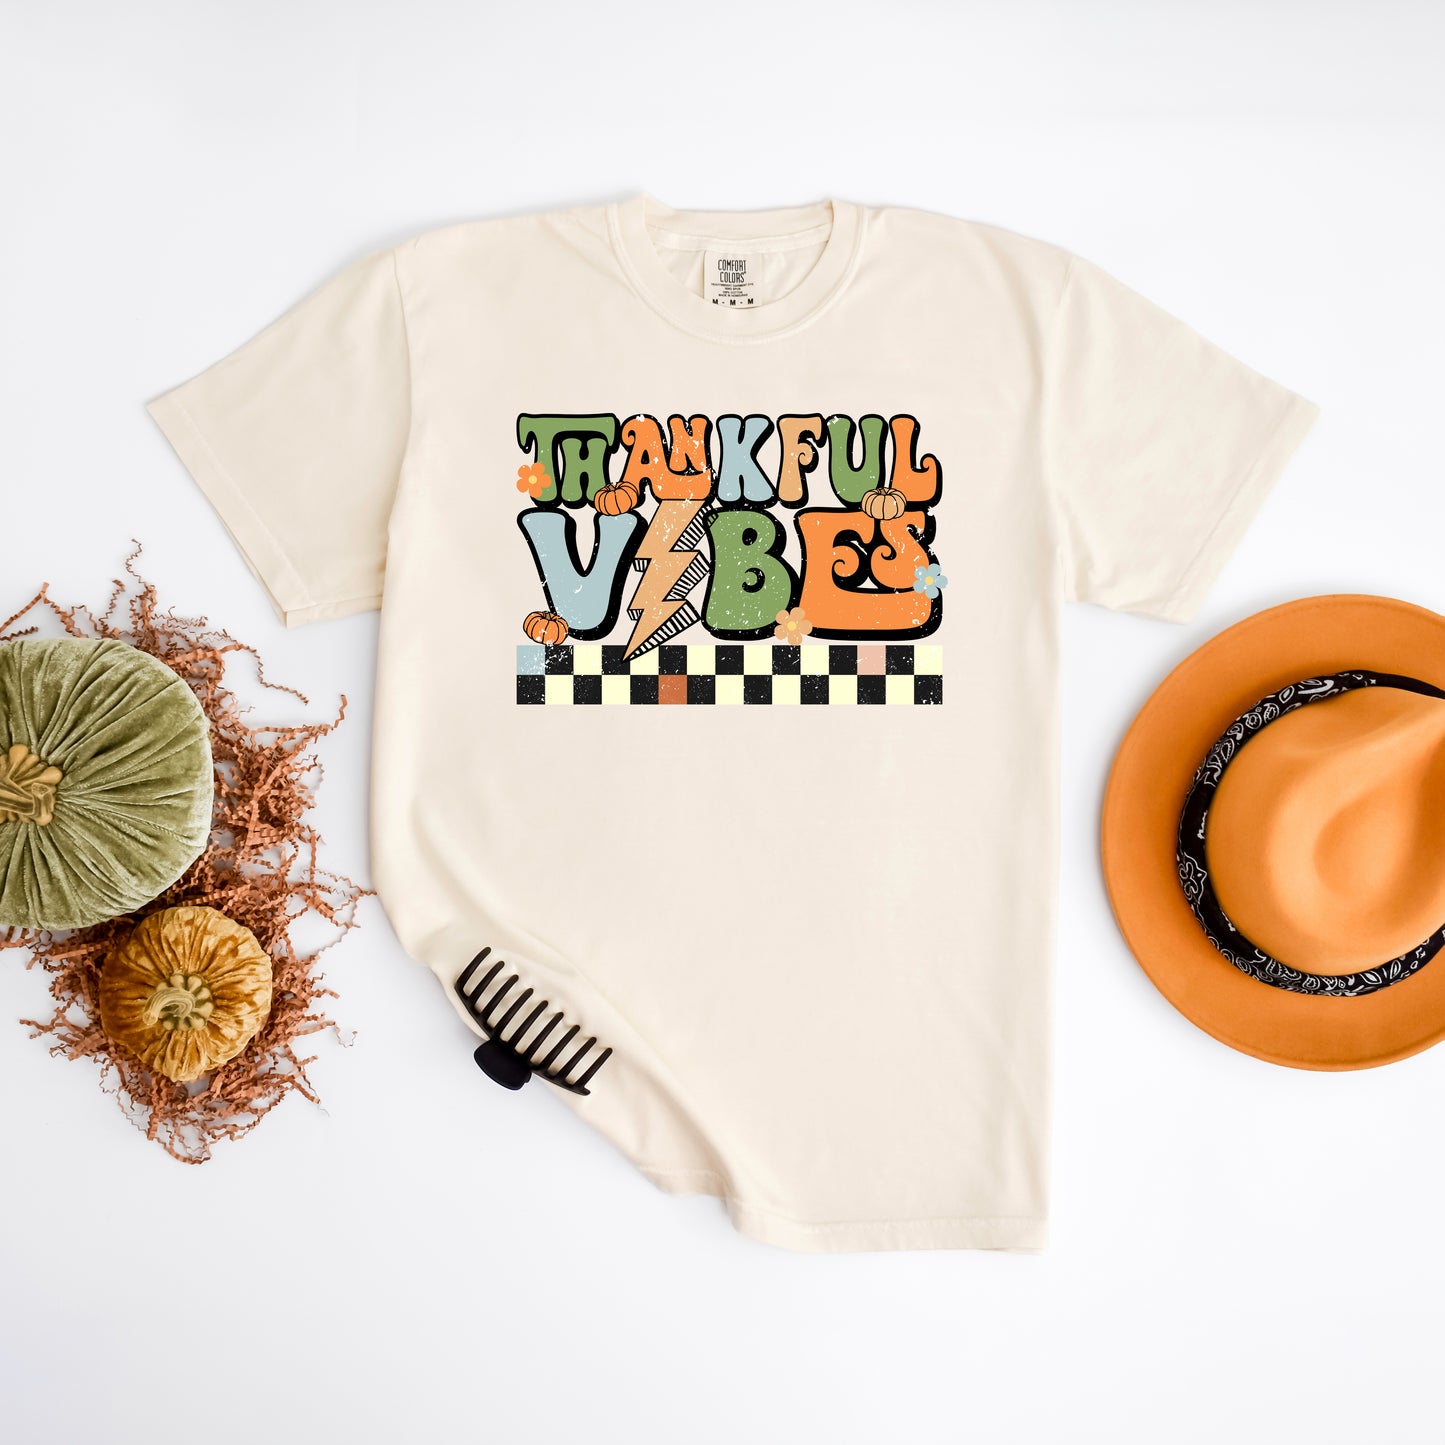 Thankful Vibes Checkered | Garment Dyed Tee